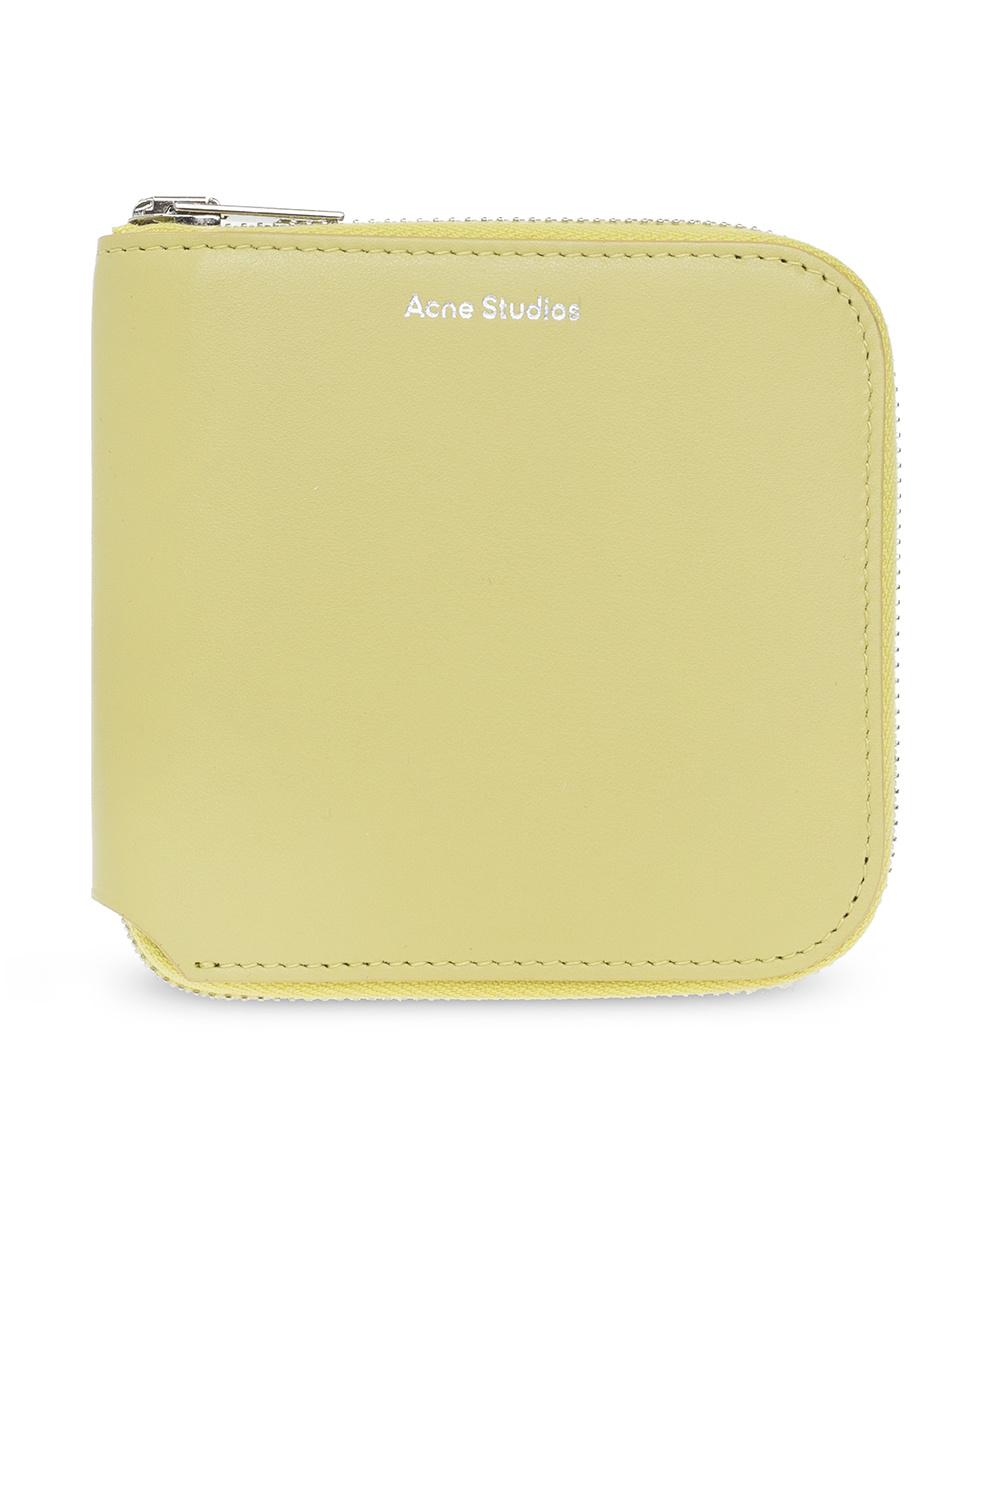 Acne Studios the hottest trend of the season